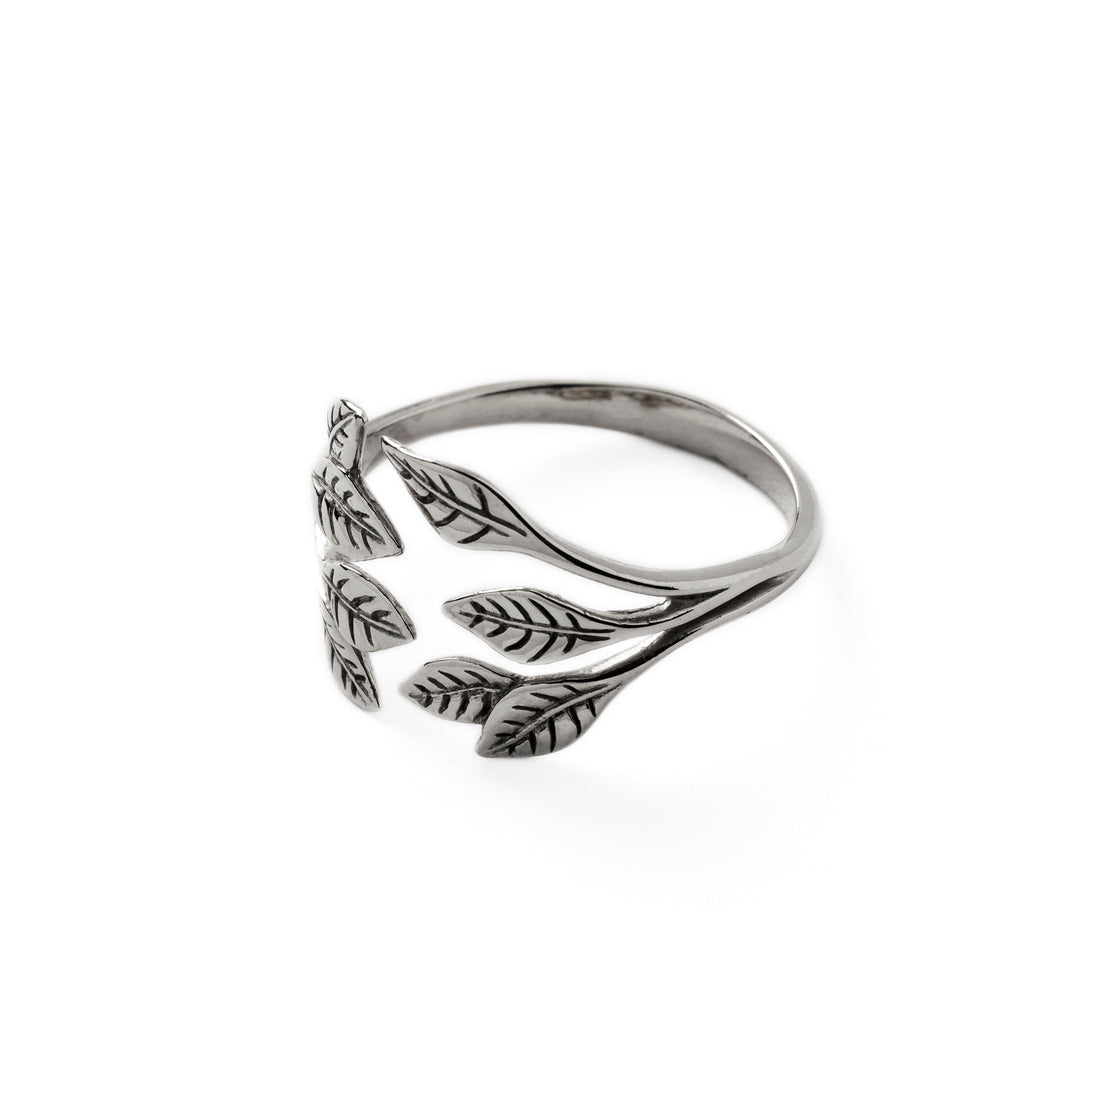 Silver Leaf Hug Ring right side view